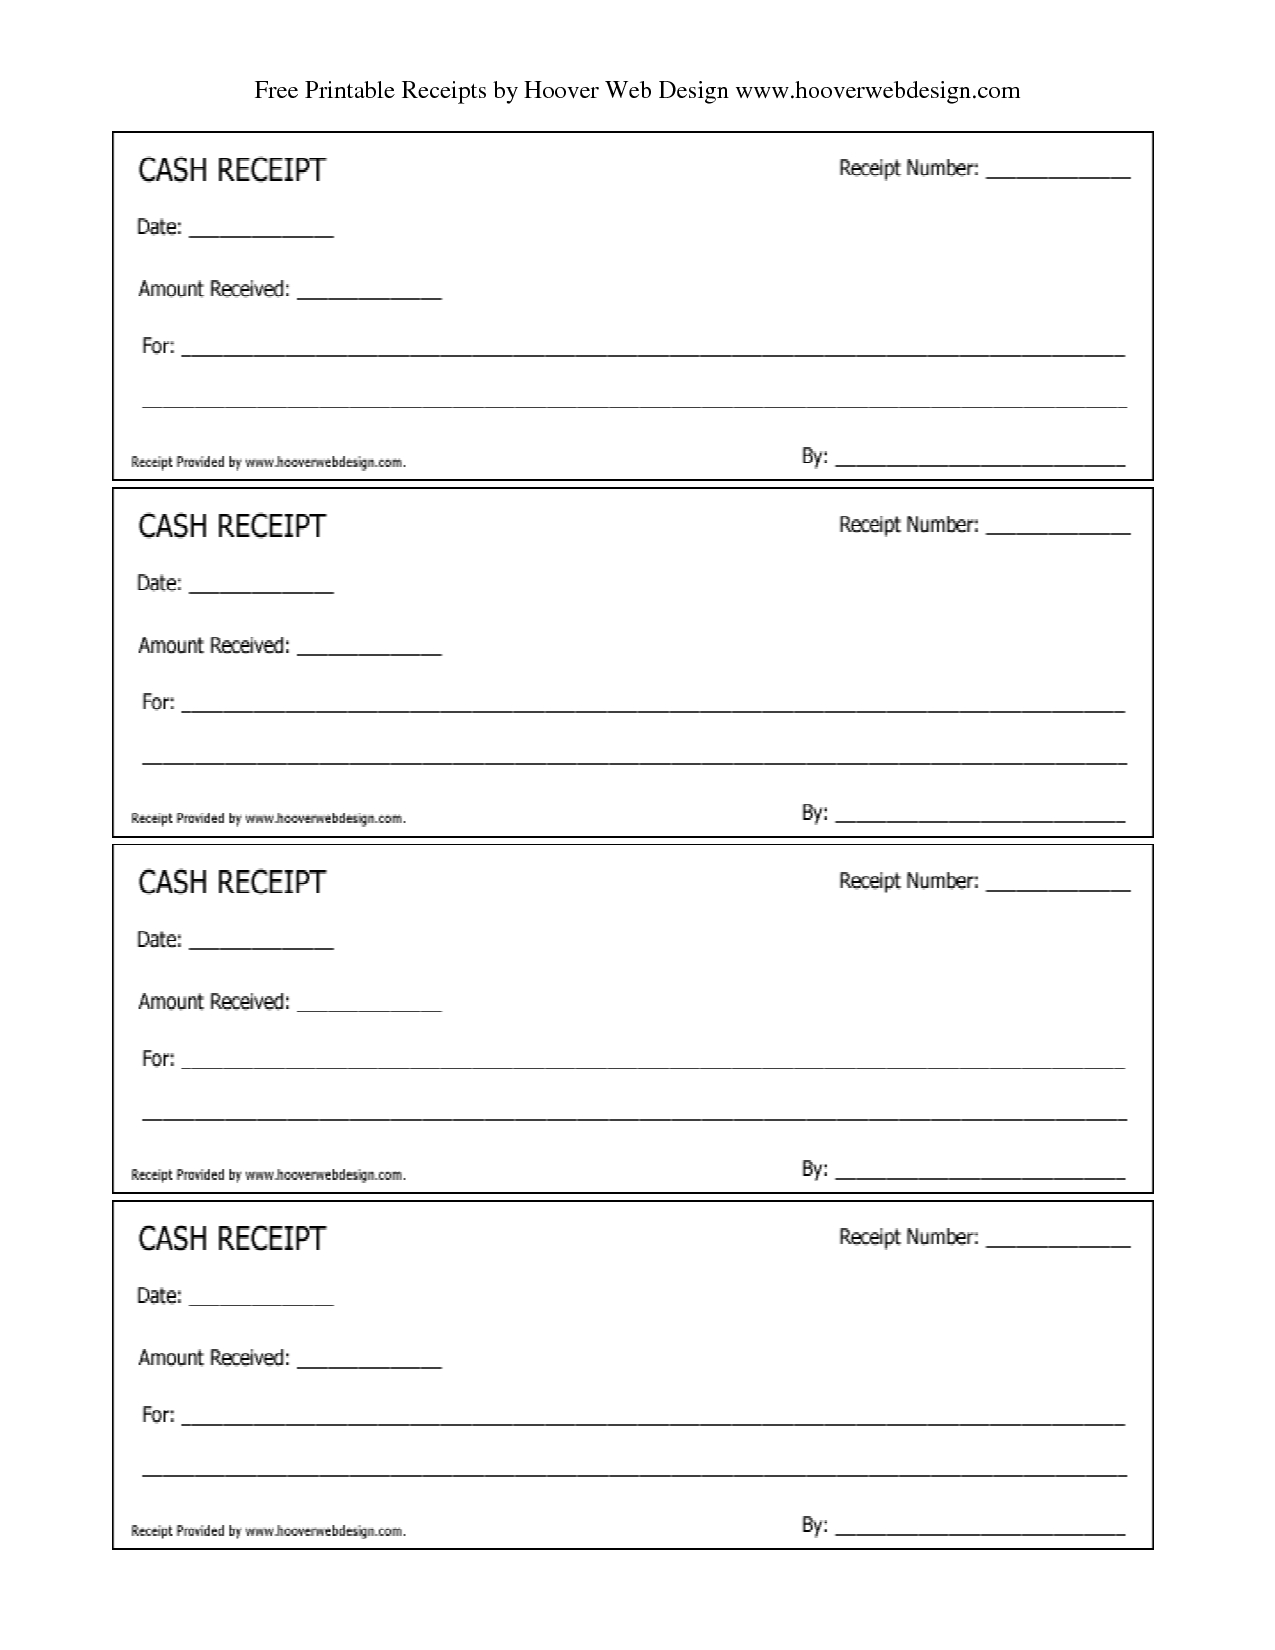 Printable Blank Receipt Forms Printable Forms Free Online